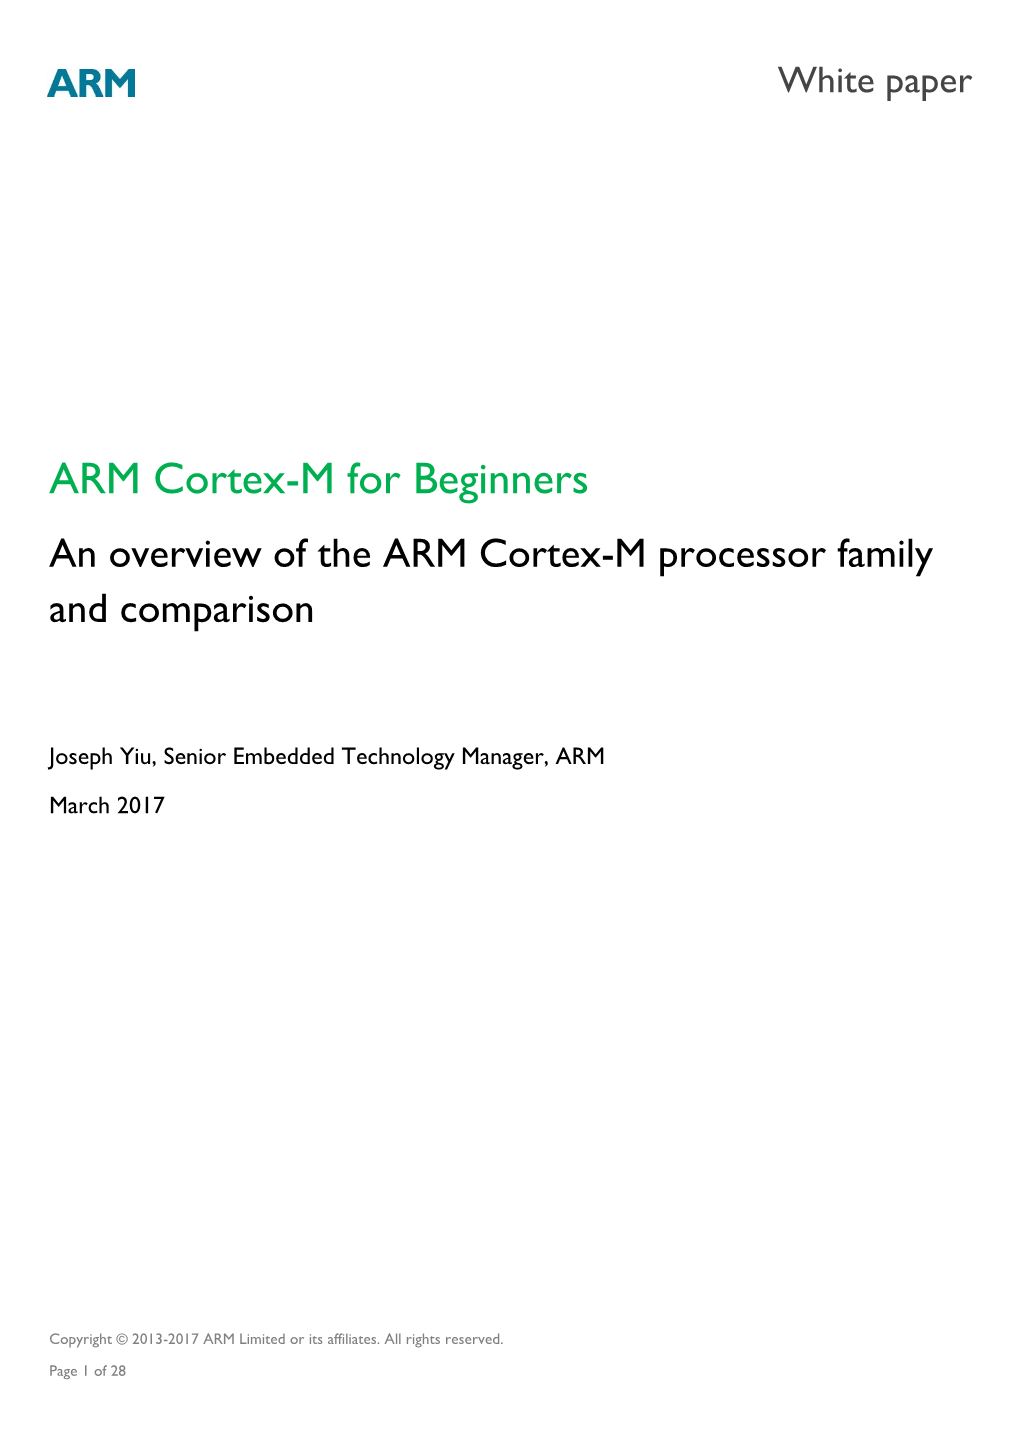 Cortex-M for Beginners an Overview of the ARM Cortex-M Processor Family and Comparison